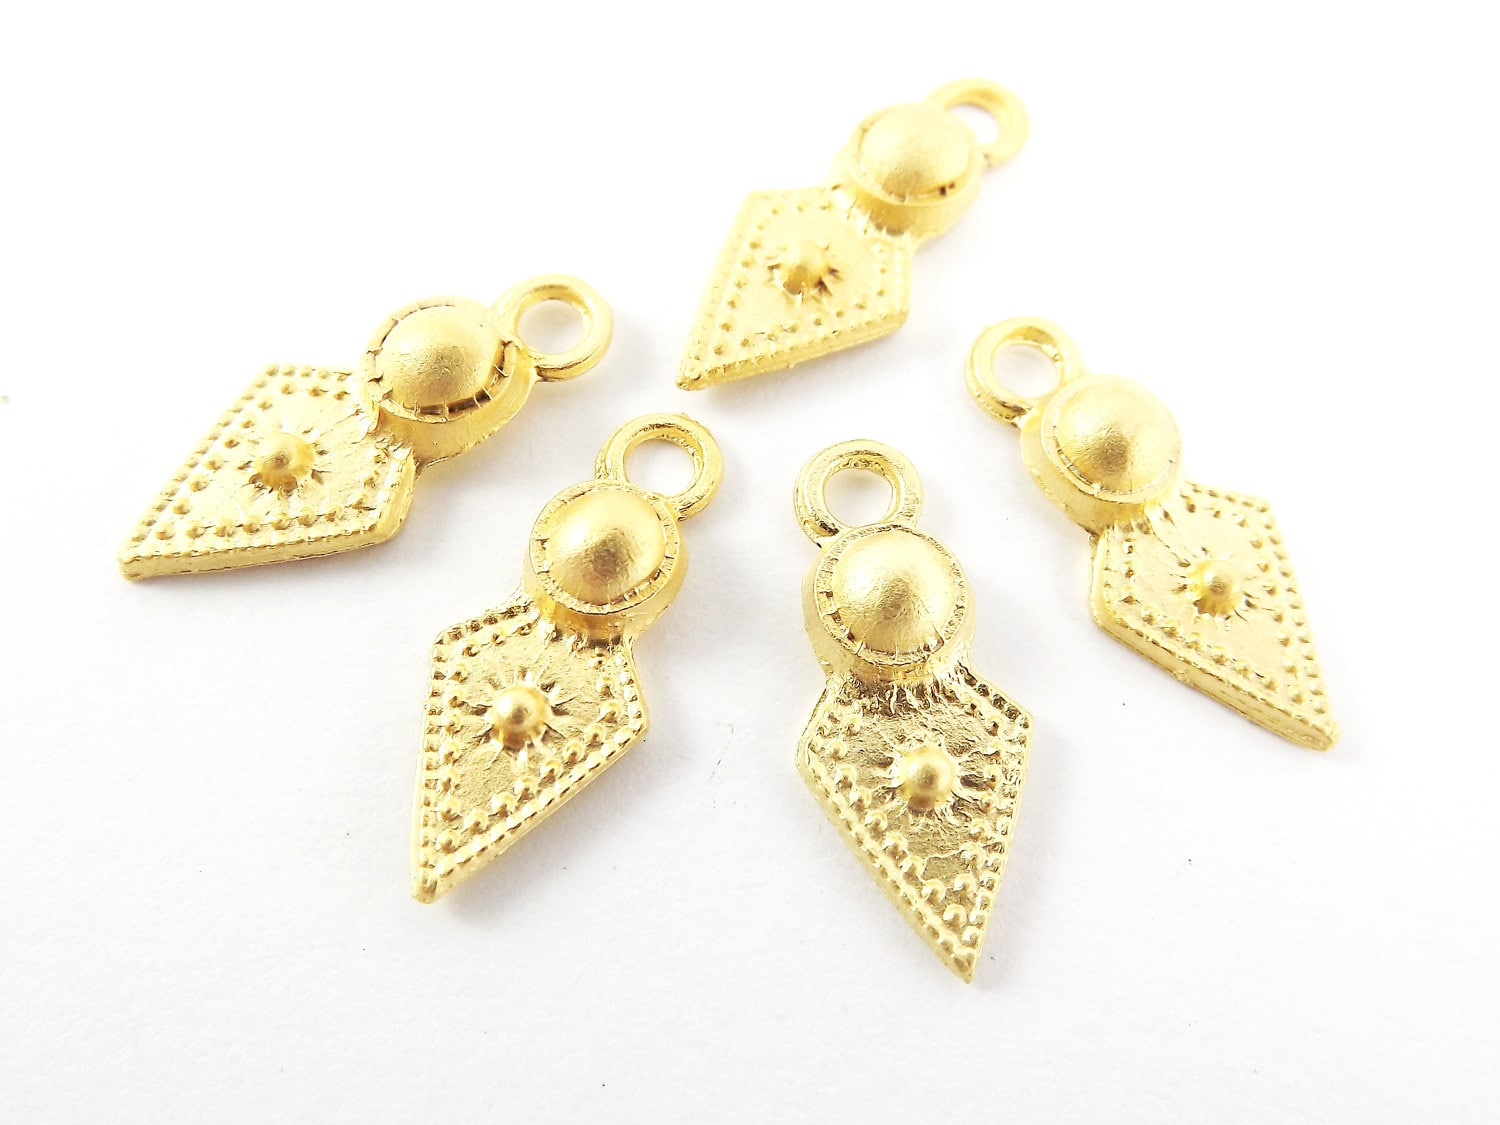 Arrow Spear Head Spike Charms Rustic Tribal Ethnic 22k Matte Gold Plated Turkish Jewelry Making Supplies Findings Components - 5pc